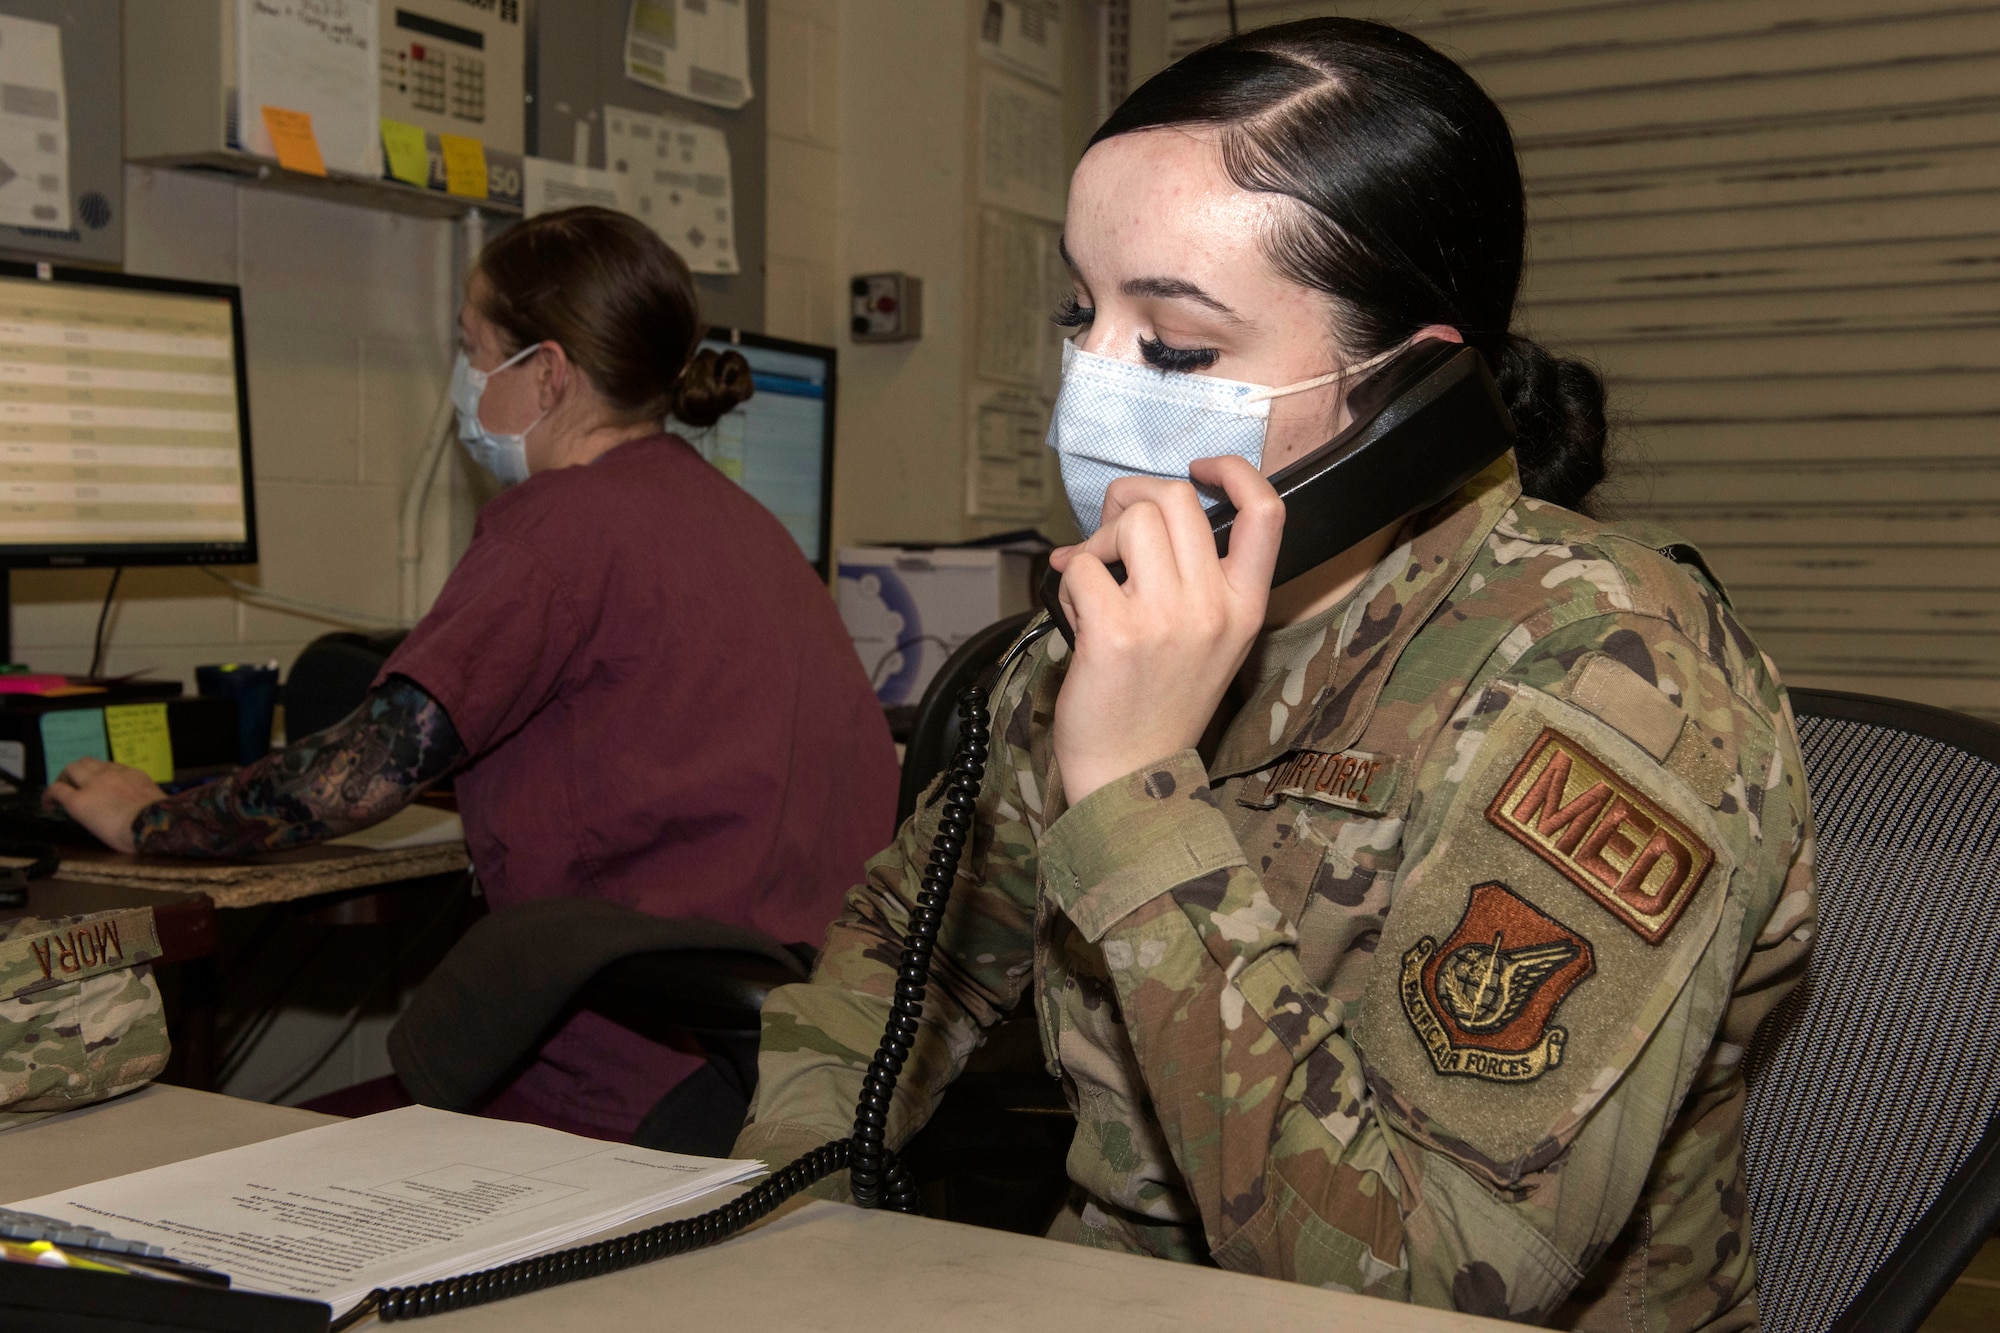 U.S. Air Force Airman 1st Class Tatiana Mora, a medical technician assigned to the 673d Medical Operations Squadron, calls a patient prior to testing at Joint Base Elmendorf-Richardson, Alaska, Nov. 20, 2020. The 673d MDG stood-up a drive-thru testing clinic to offer a fast, safe way to provide testing to base personnel and their dependents.